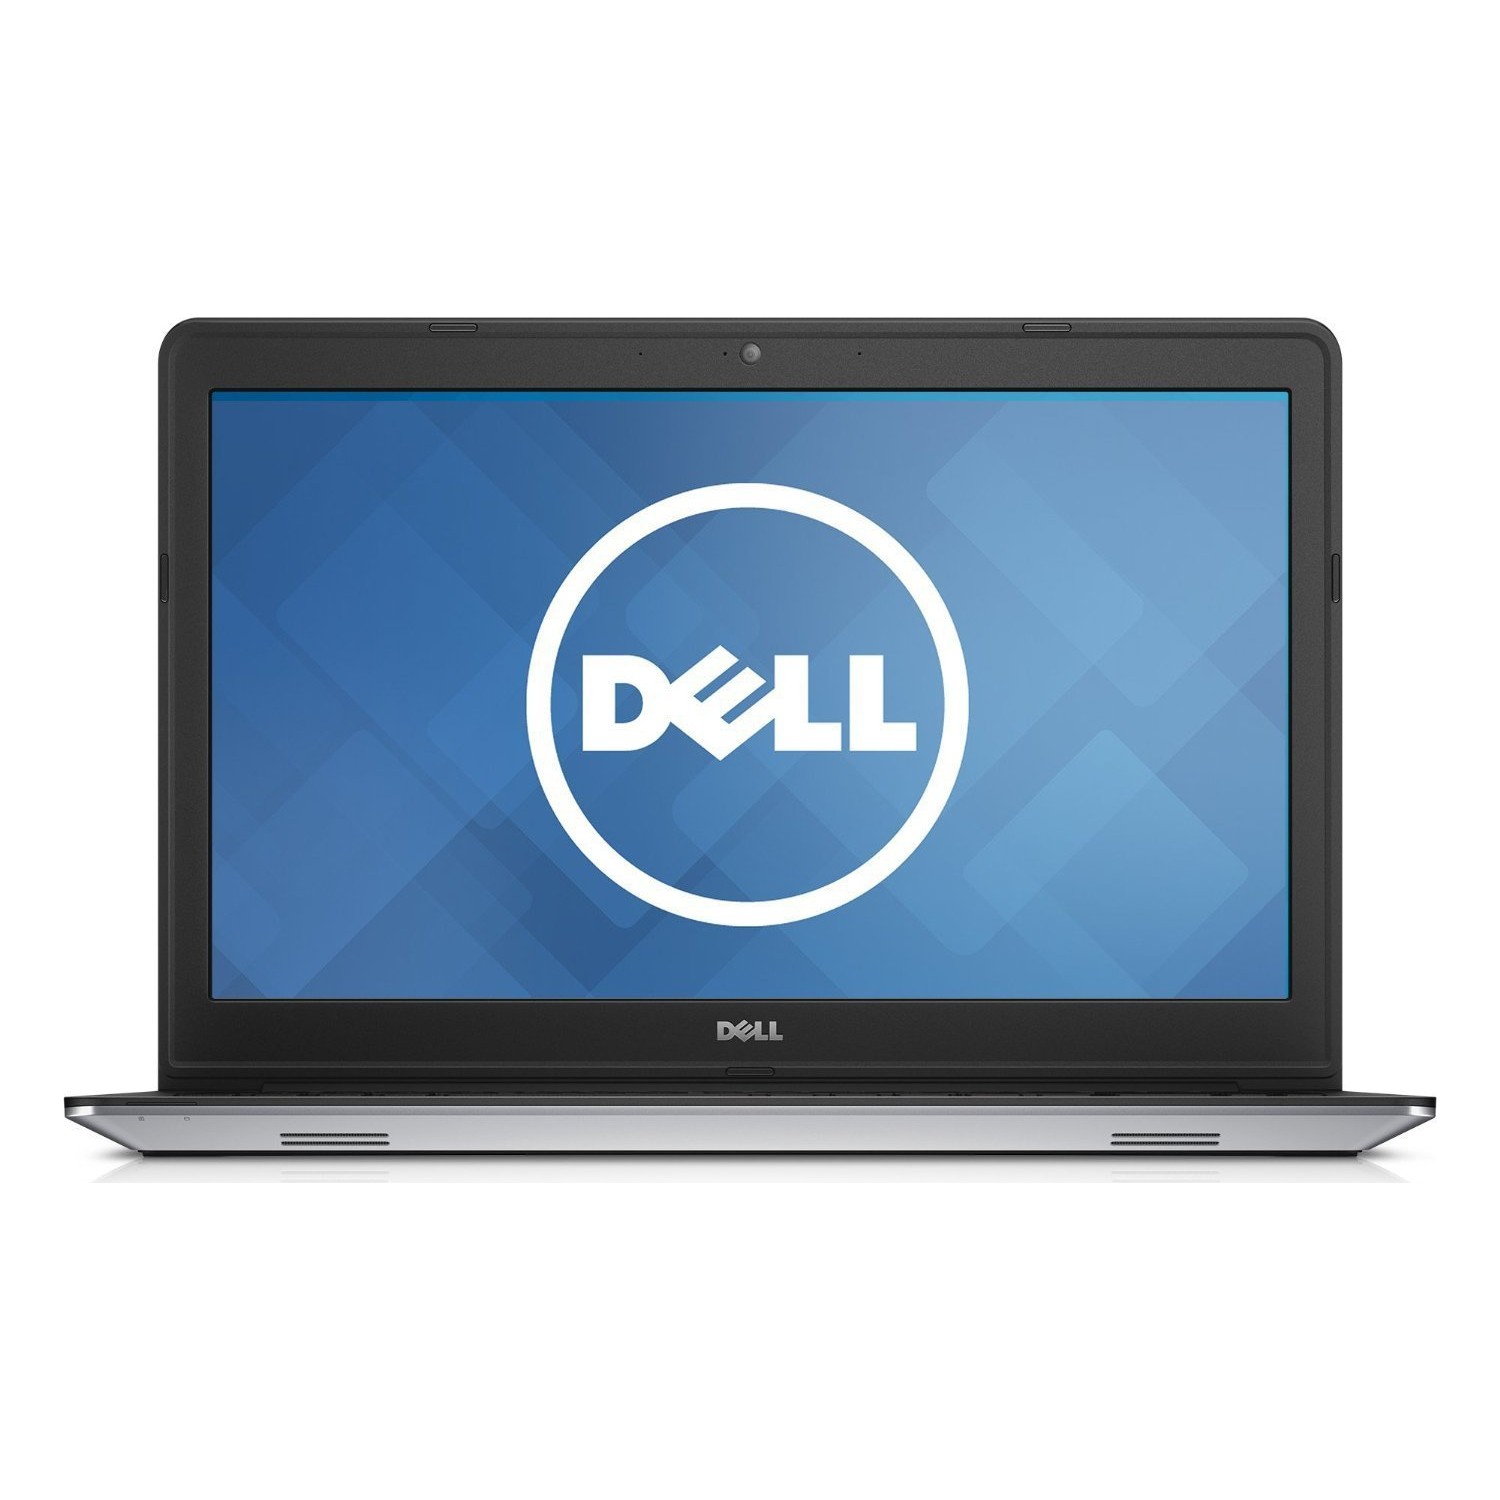 Dell Inspiron 15 7558 Notebook